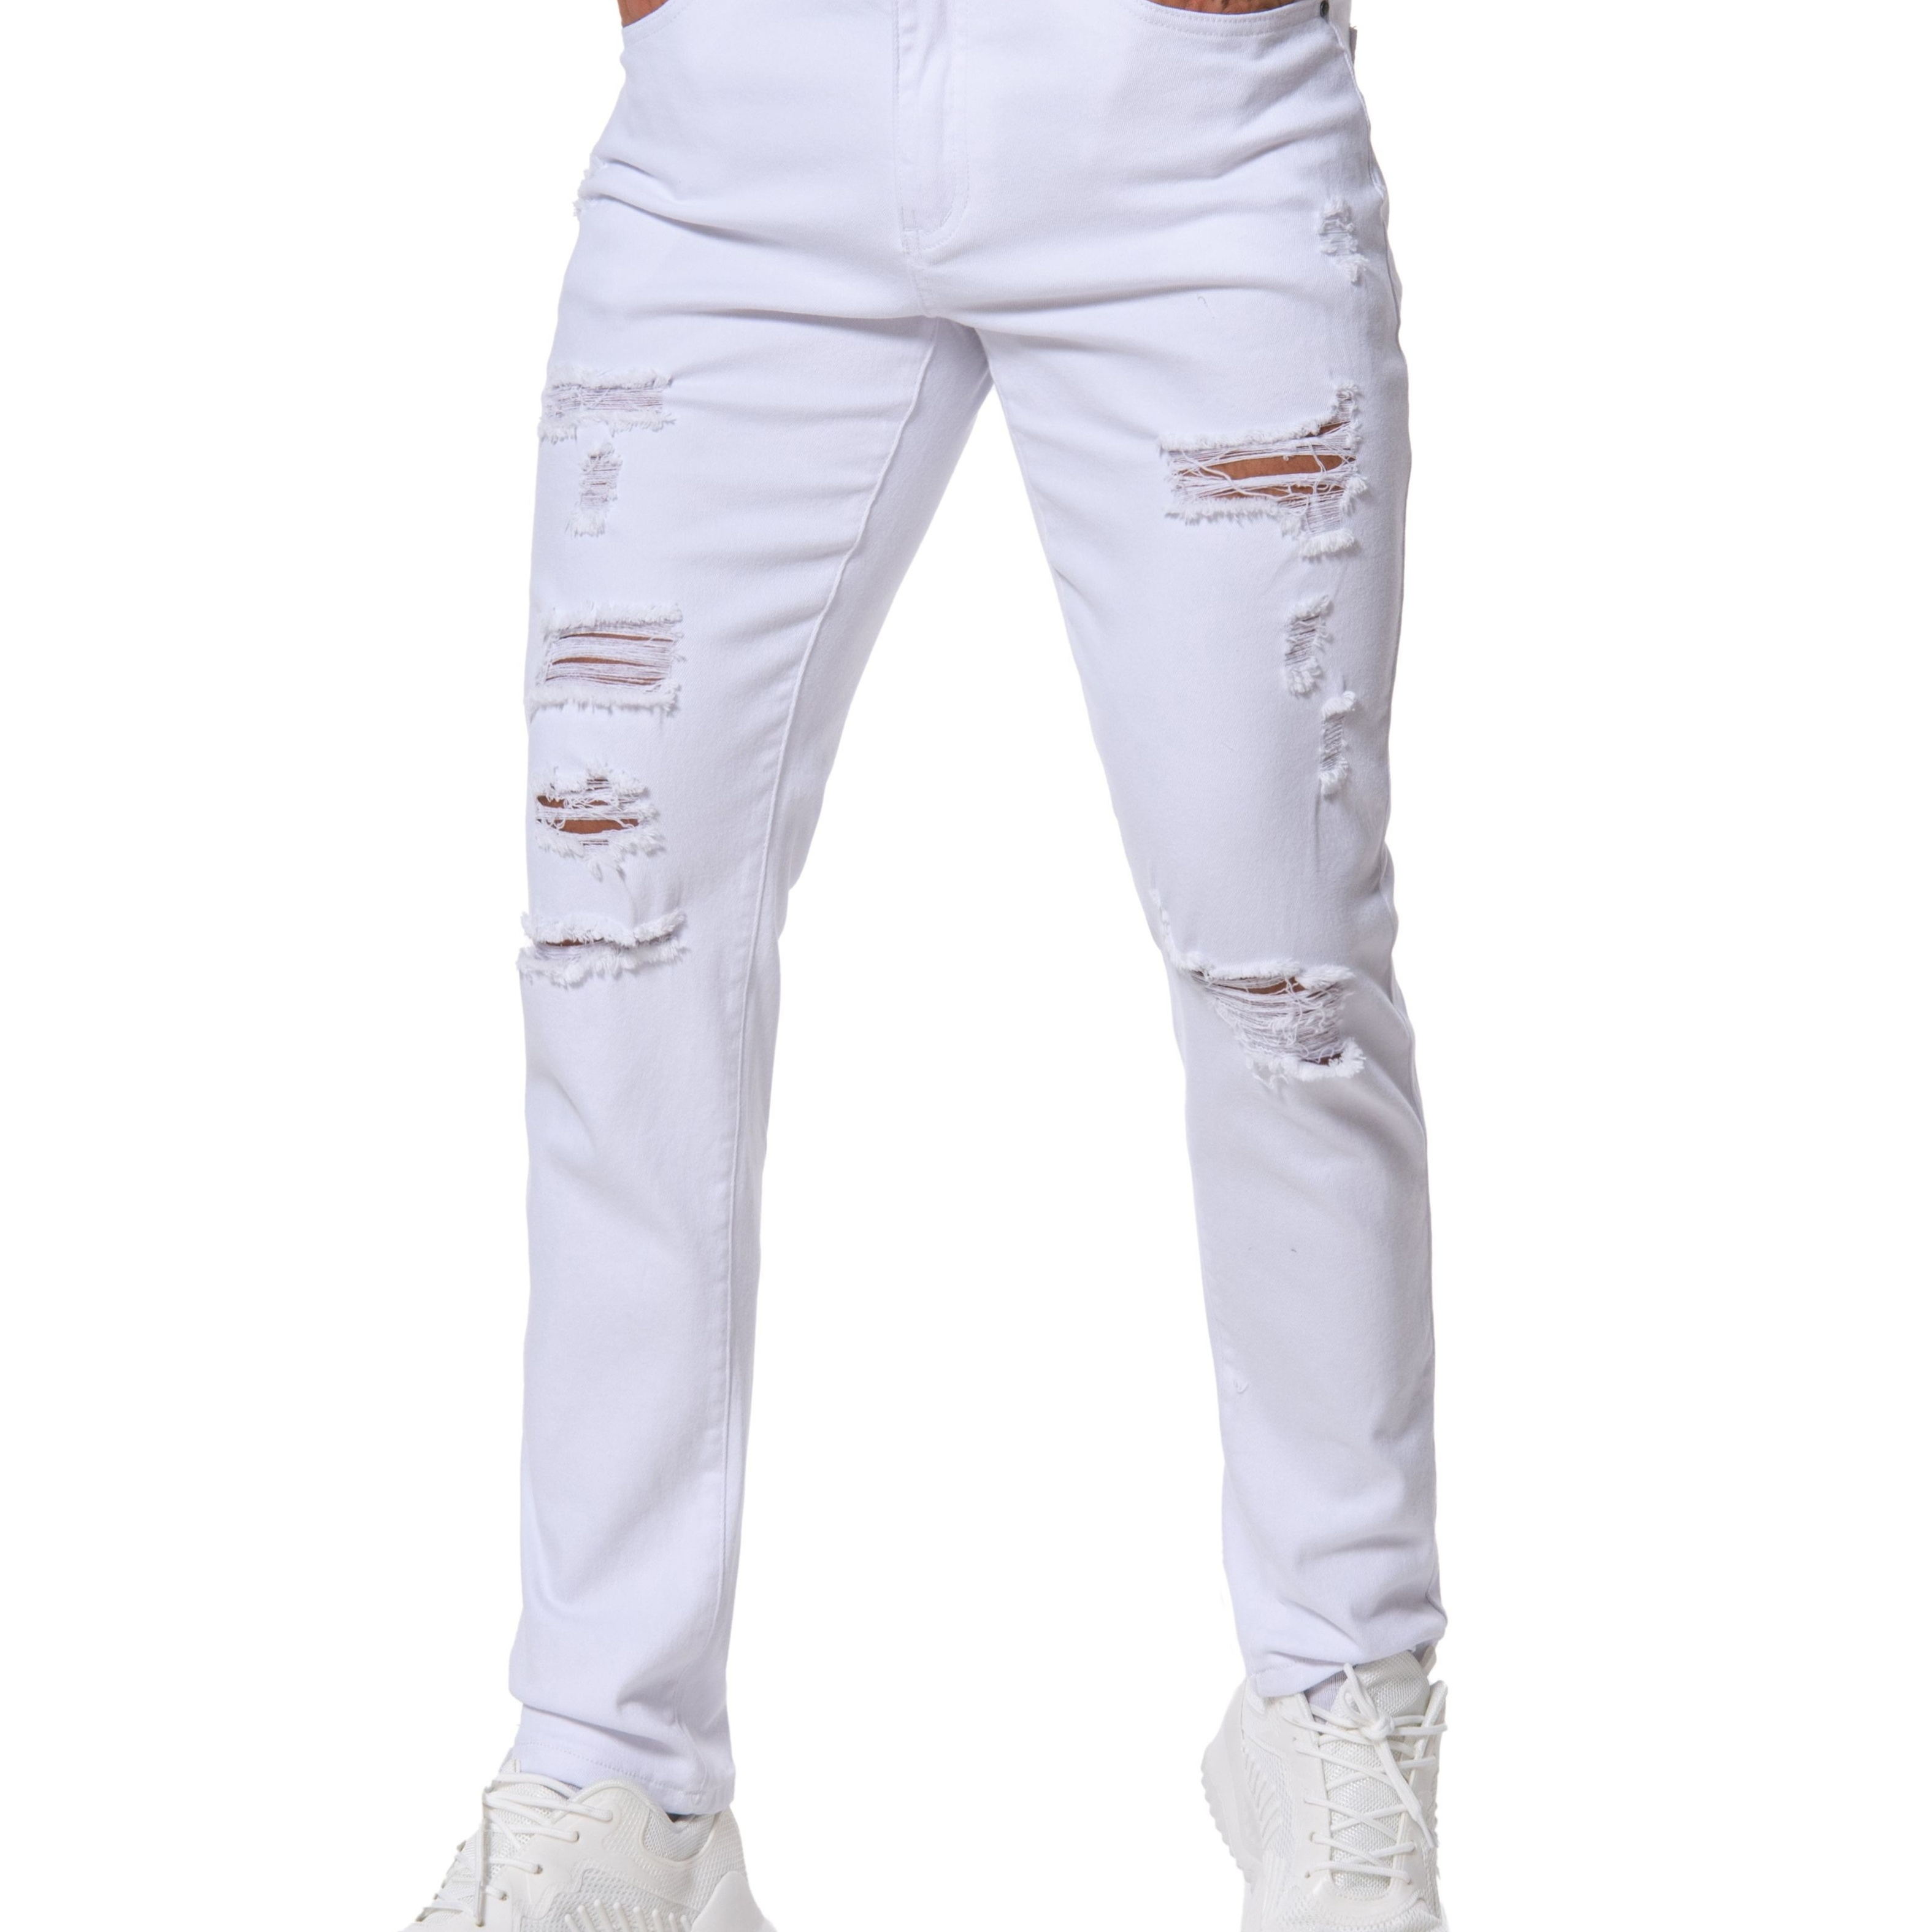 

Slim Fit Ripped Jeans, Men's Casual Street Style Medium Stretch Denim Pants For Spring Summer, Men's Bottoms